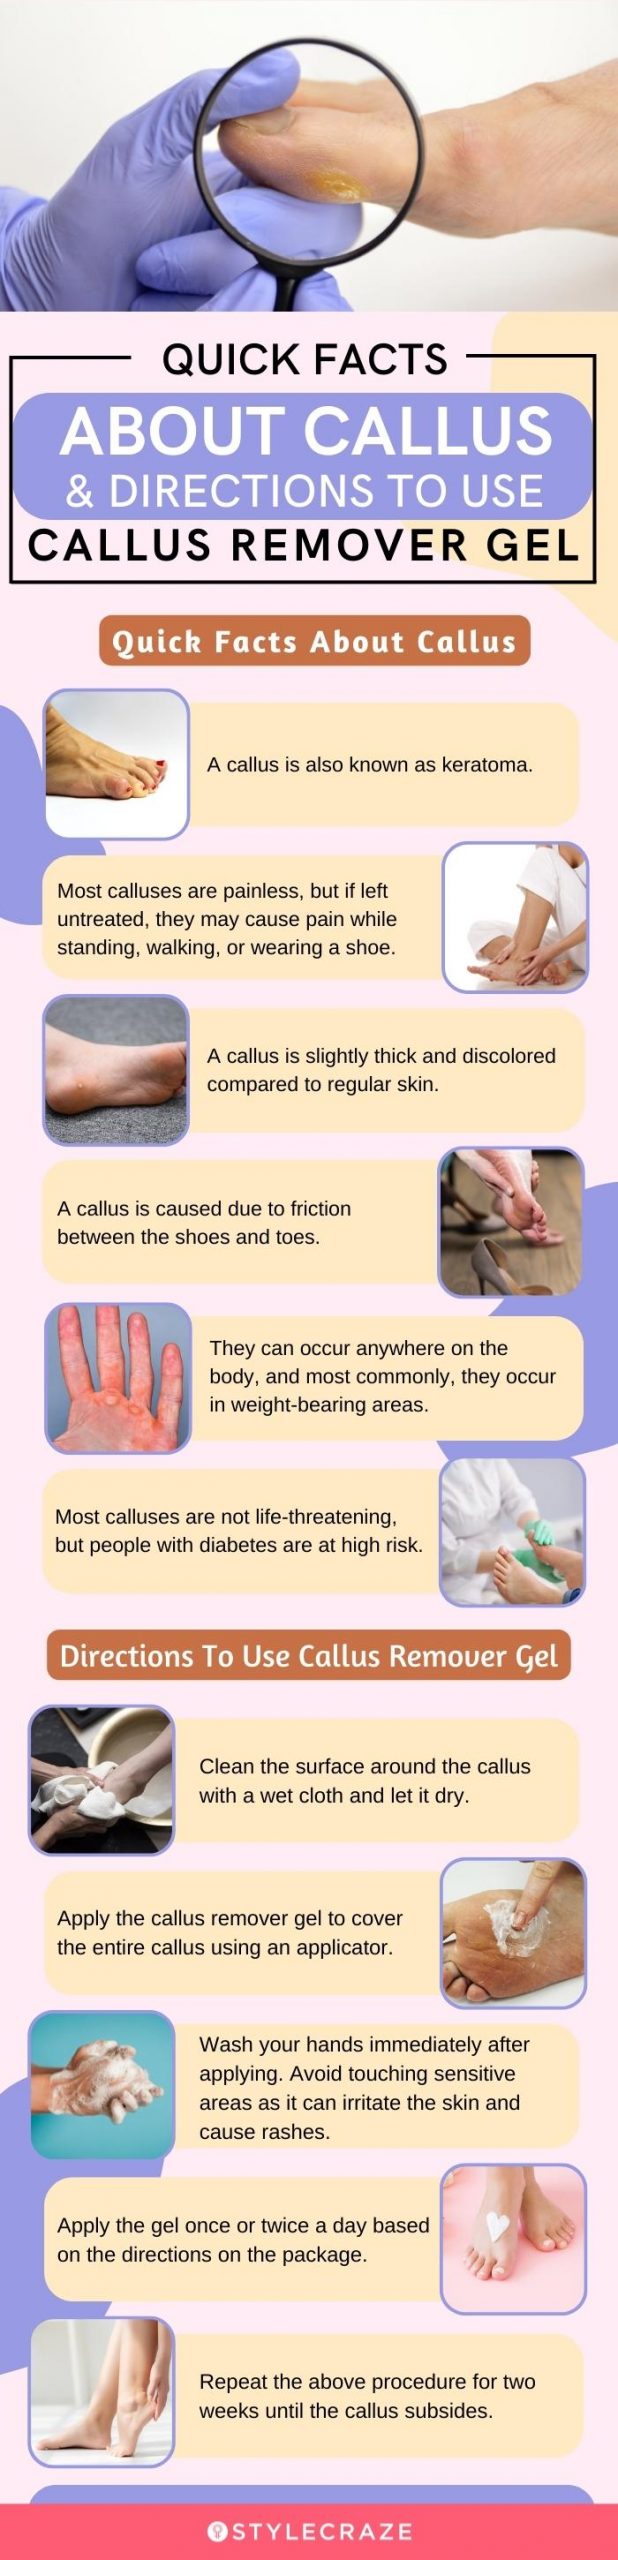 Quick Facts About Callus And Directions To Use Callus Remover Gel [infographic]